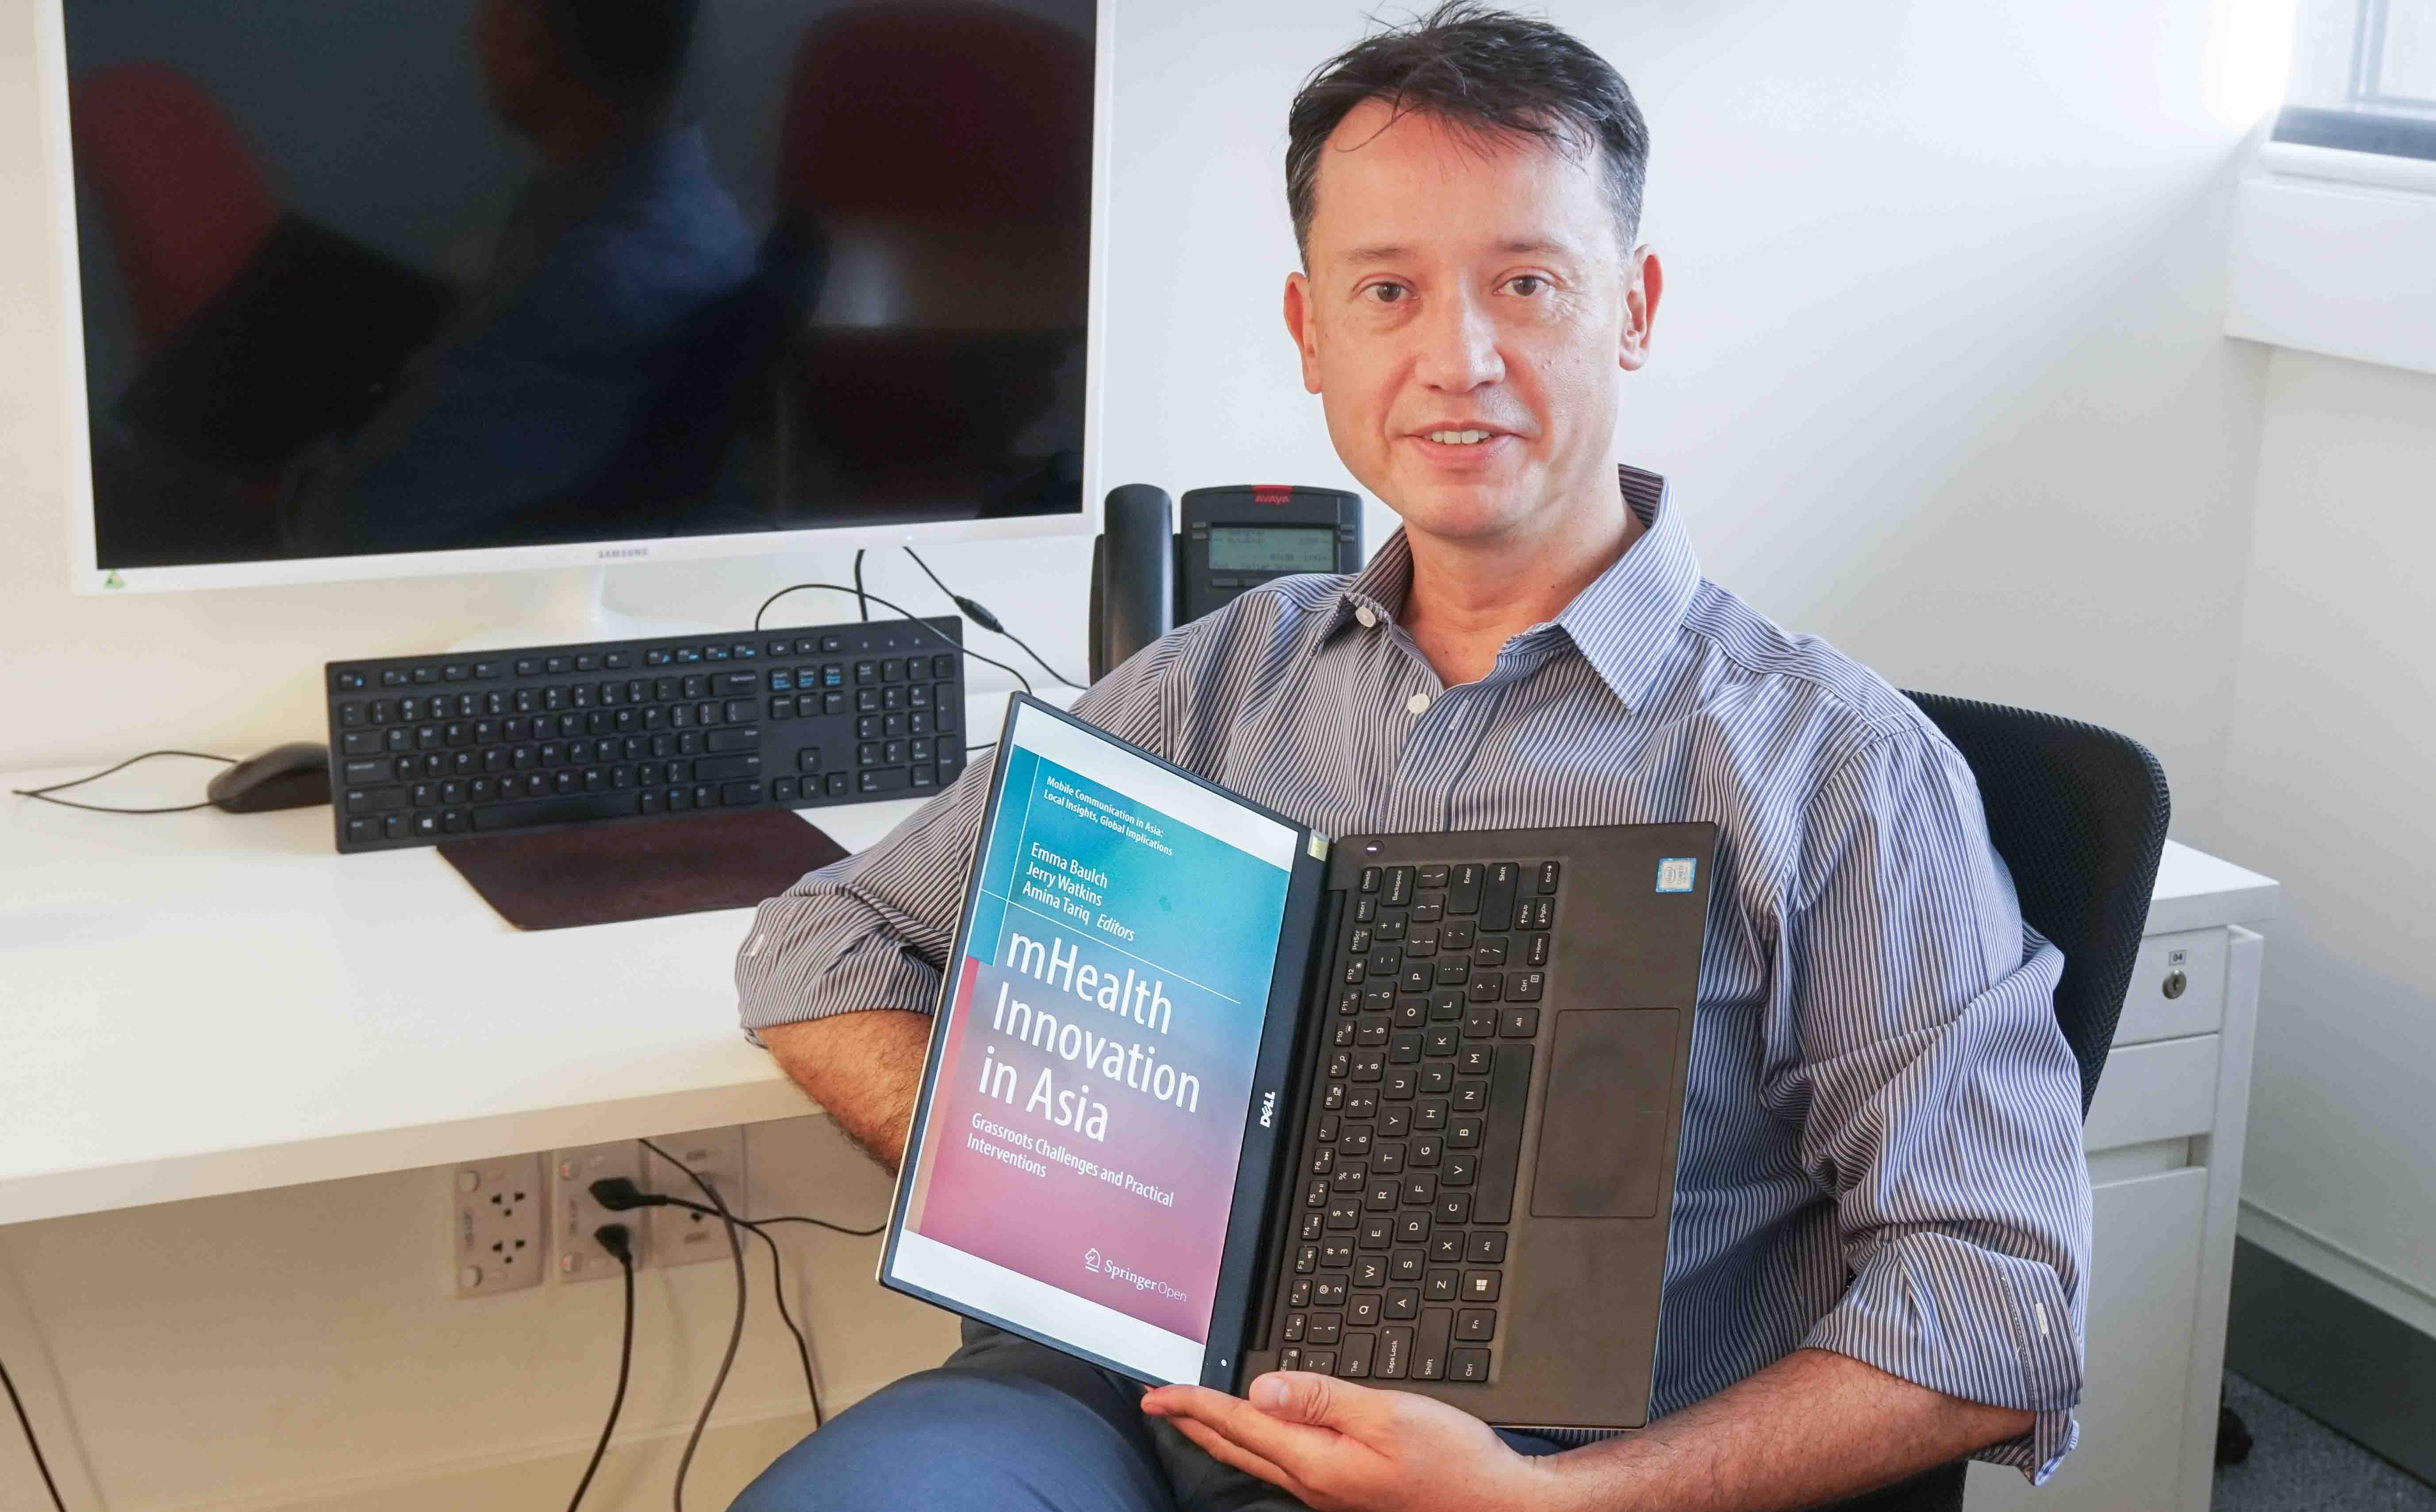 Associate Professor Jerry Watkins was one of the researchers and editors for the book mHealth Innovation in Asia.